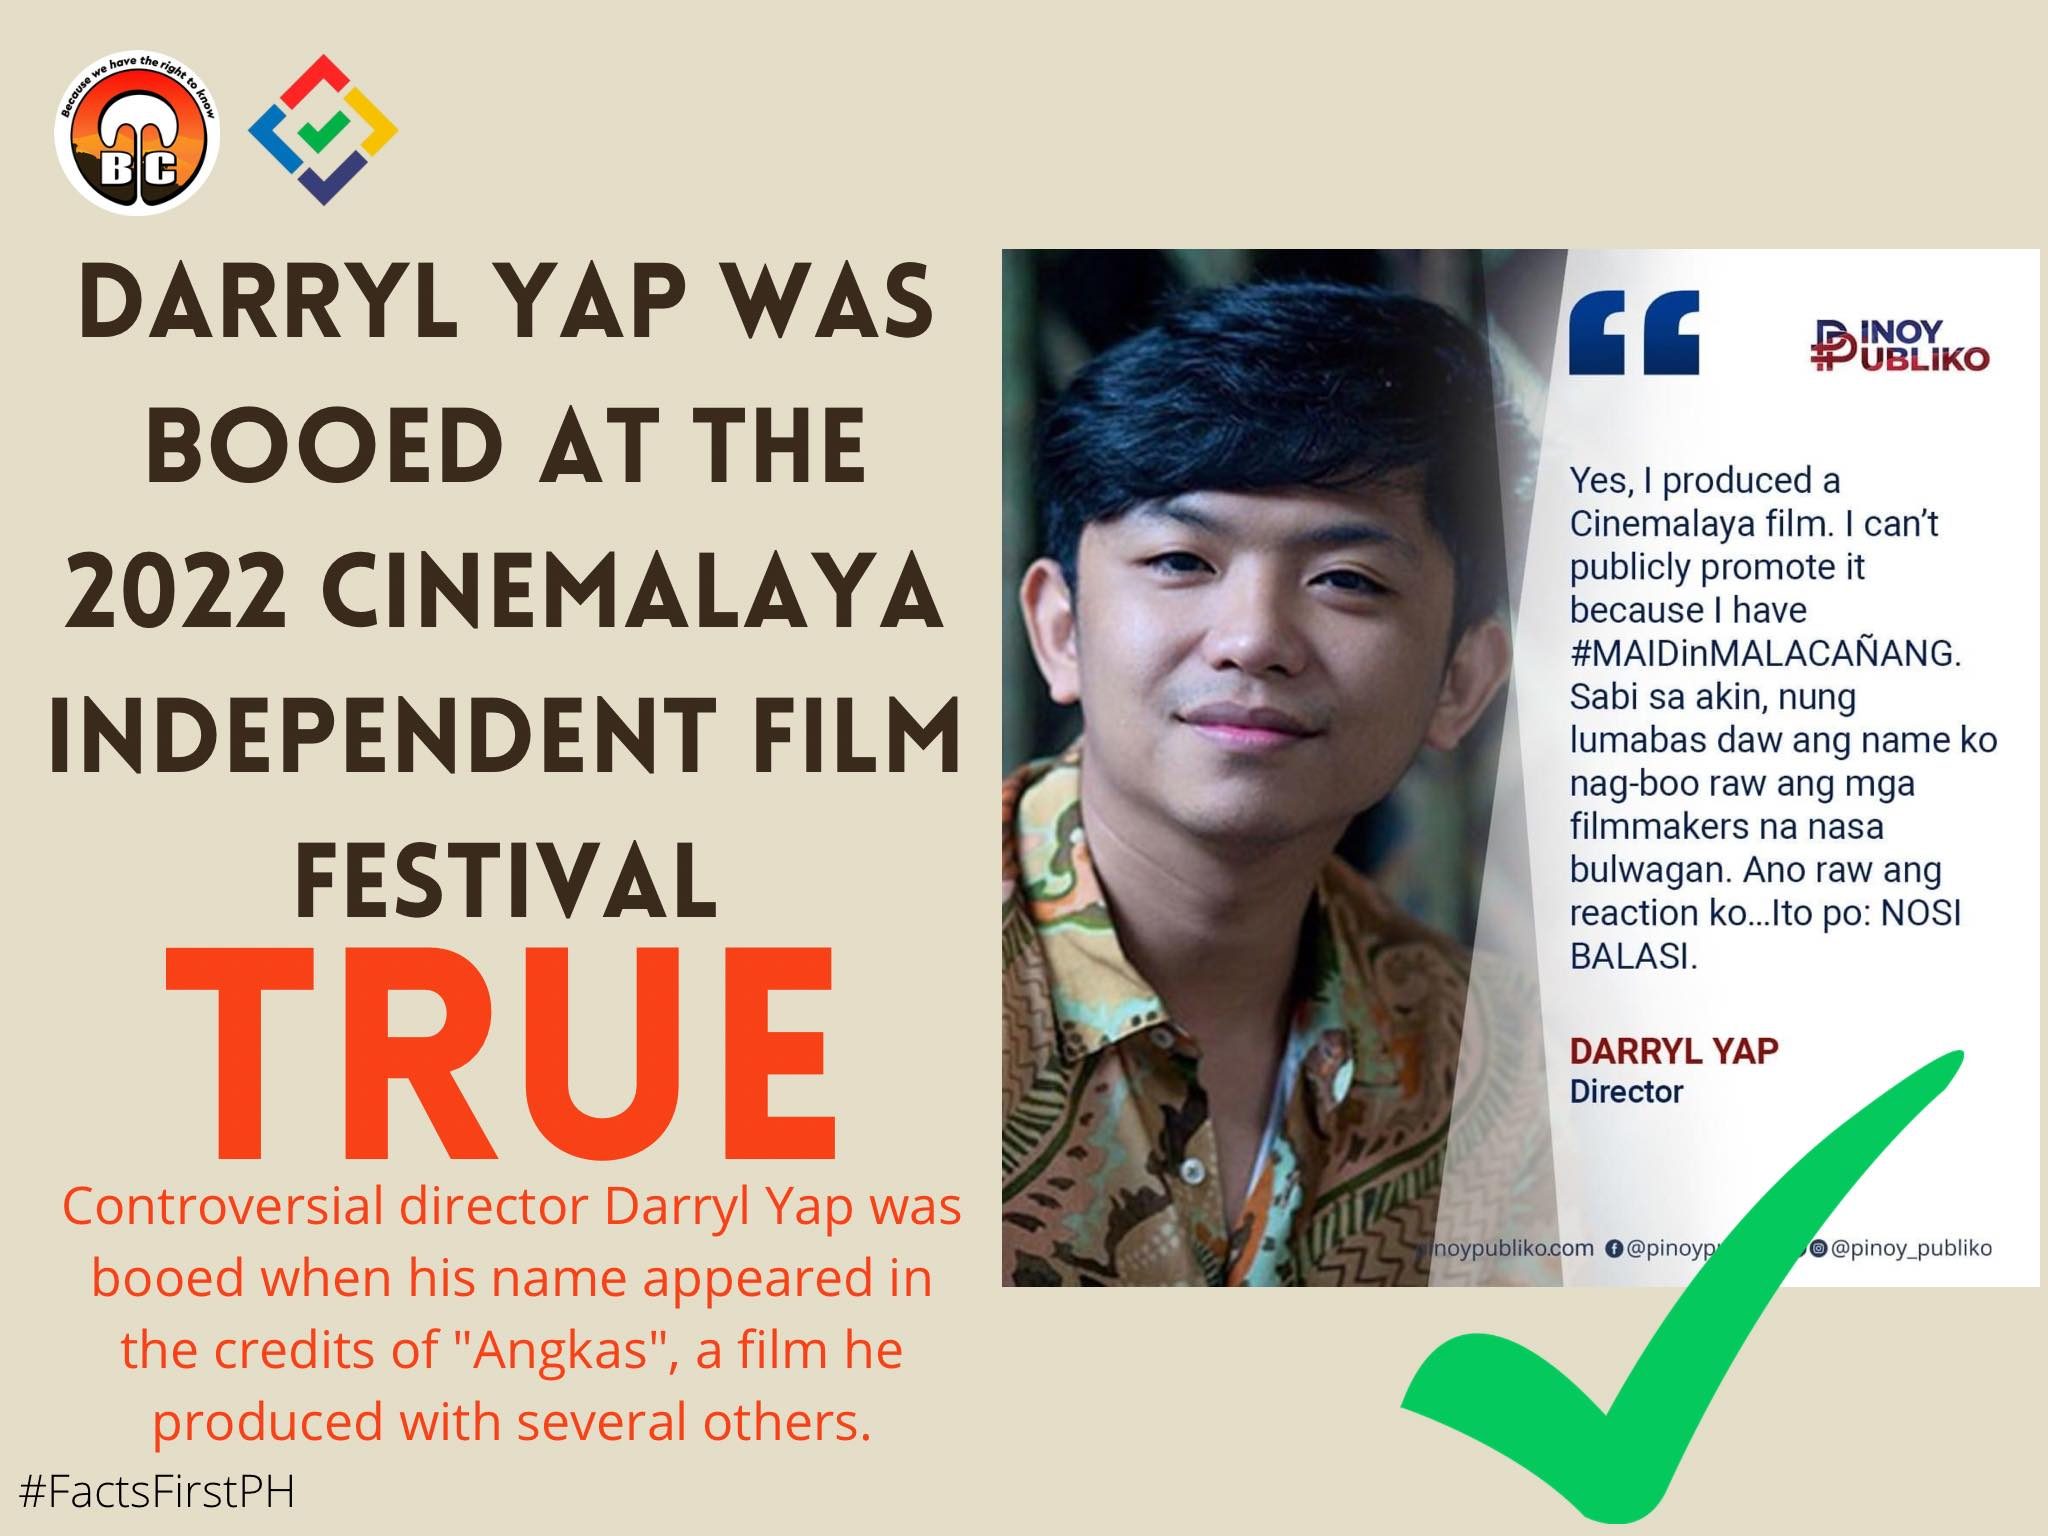 FACT CHECK: Darryl Yap was booed at the 2022 Cinemalaya Independent Film Festival #FactsFirstPH